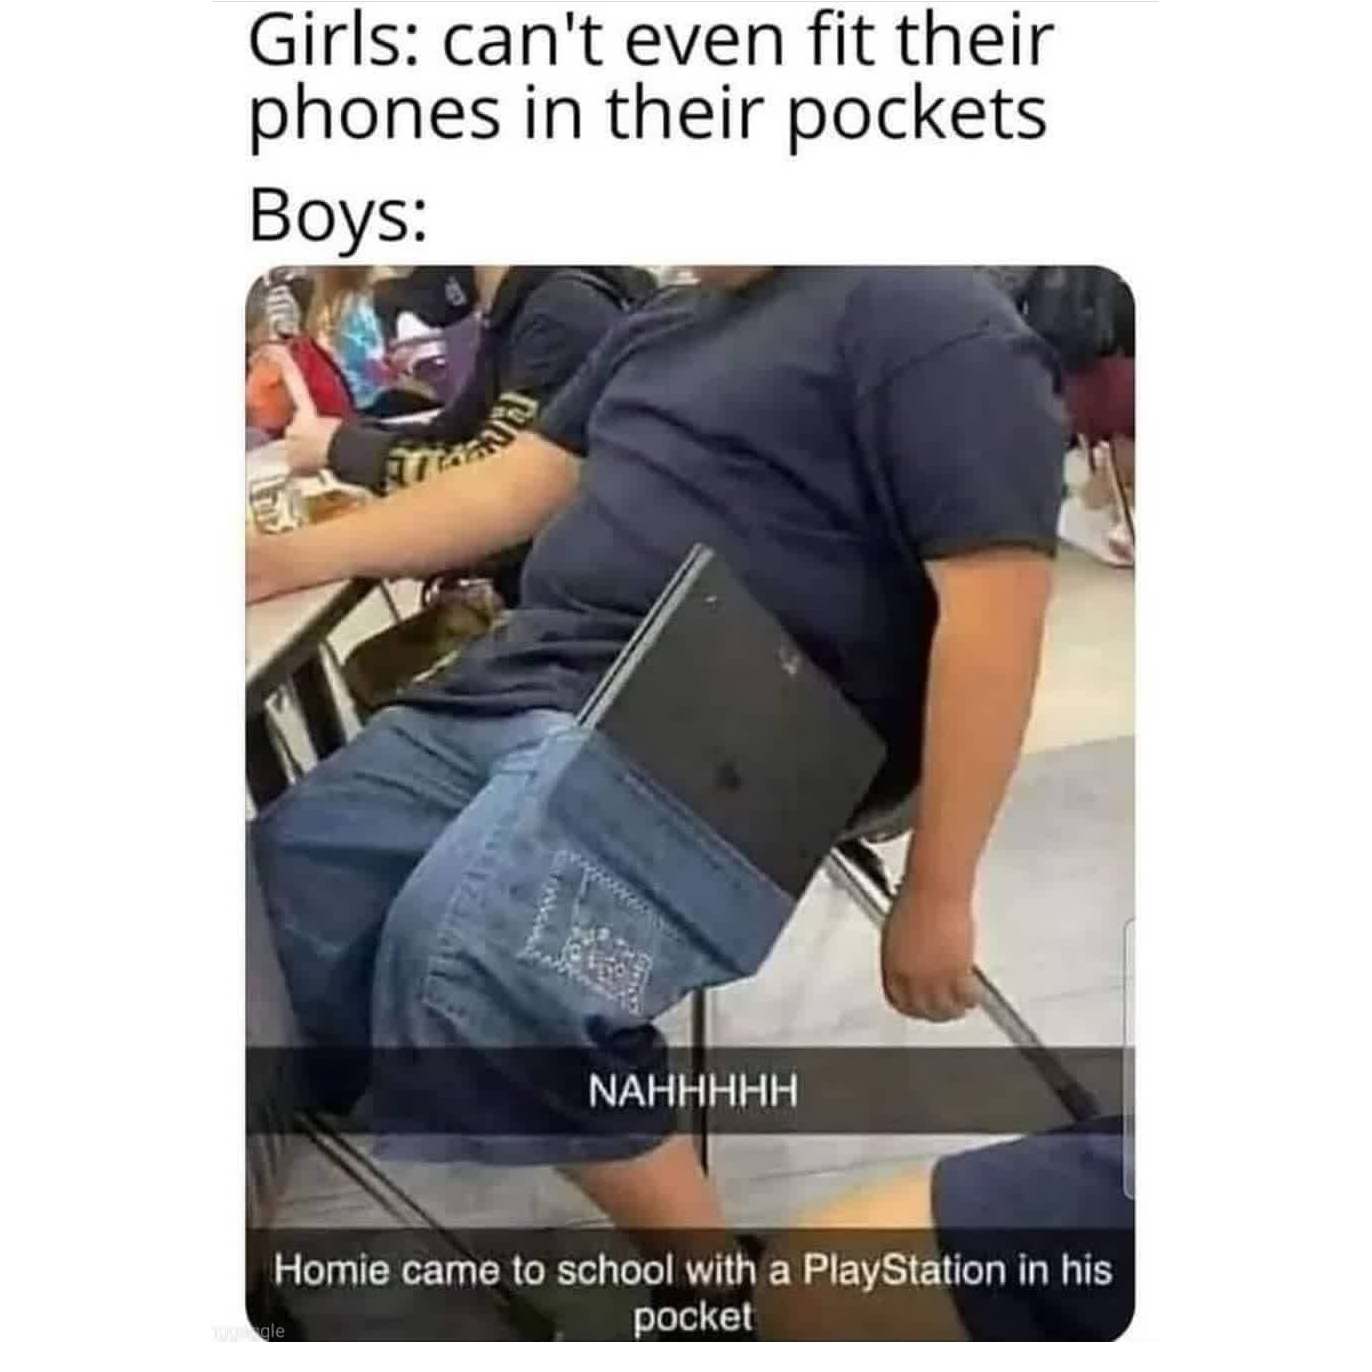 homie came to school with a playstation - Girls can't even fit their phones in their pockets Boys Nahhhhh Homie came to school with a PlayStation in his pocket